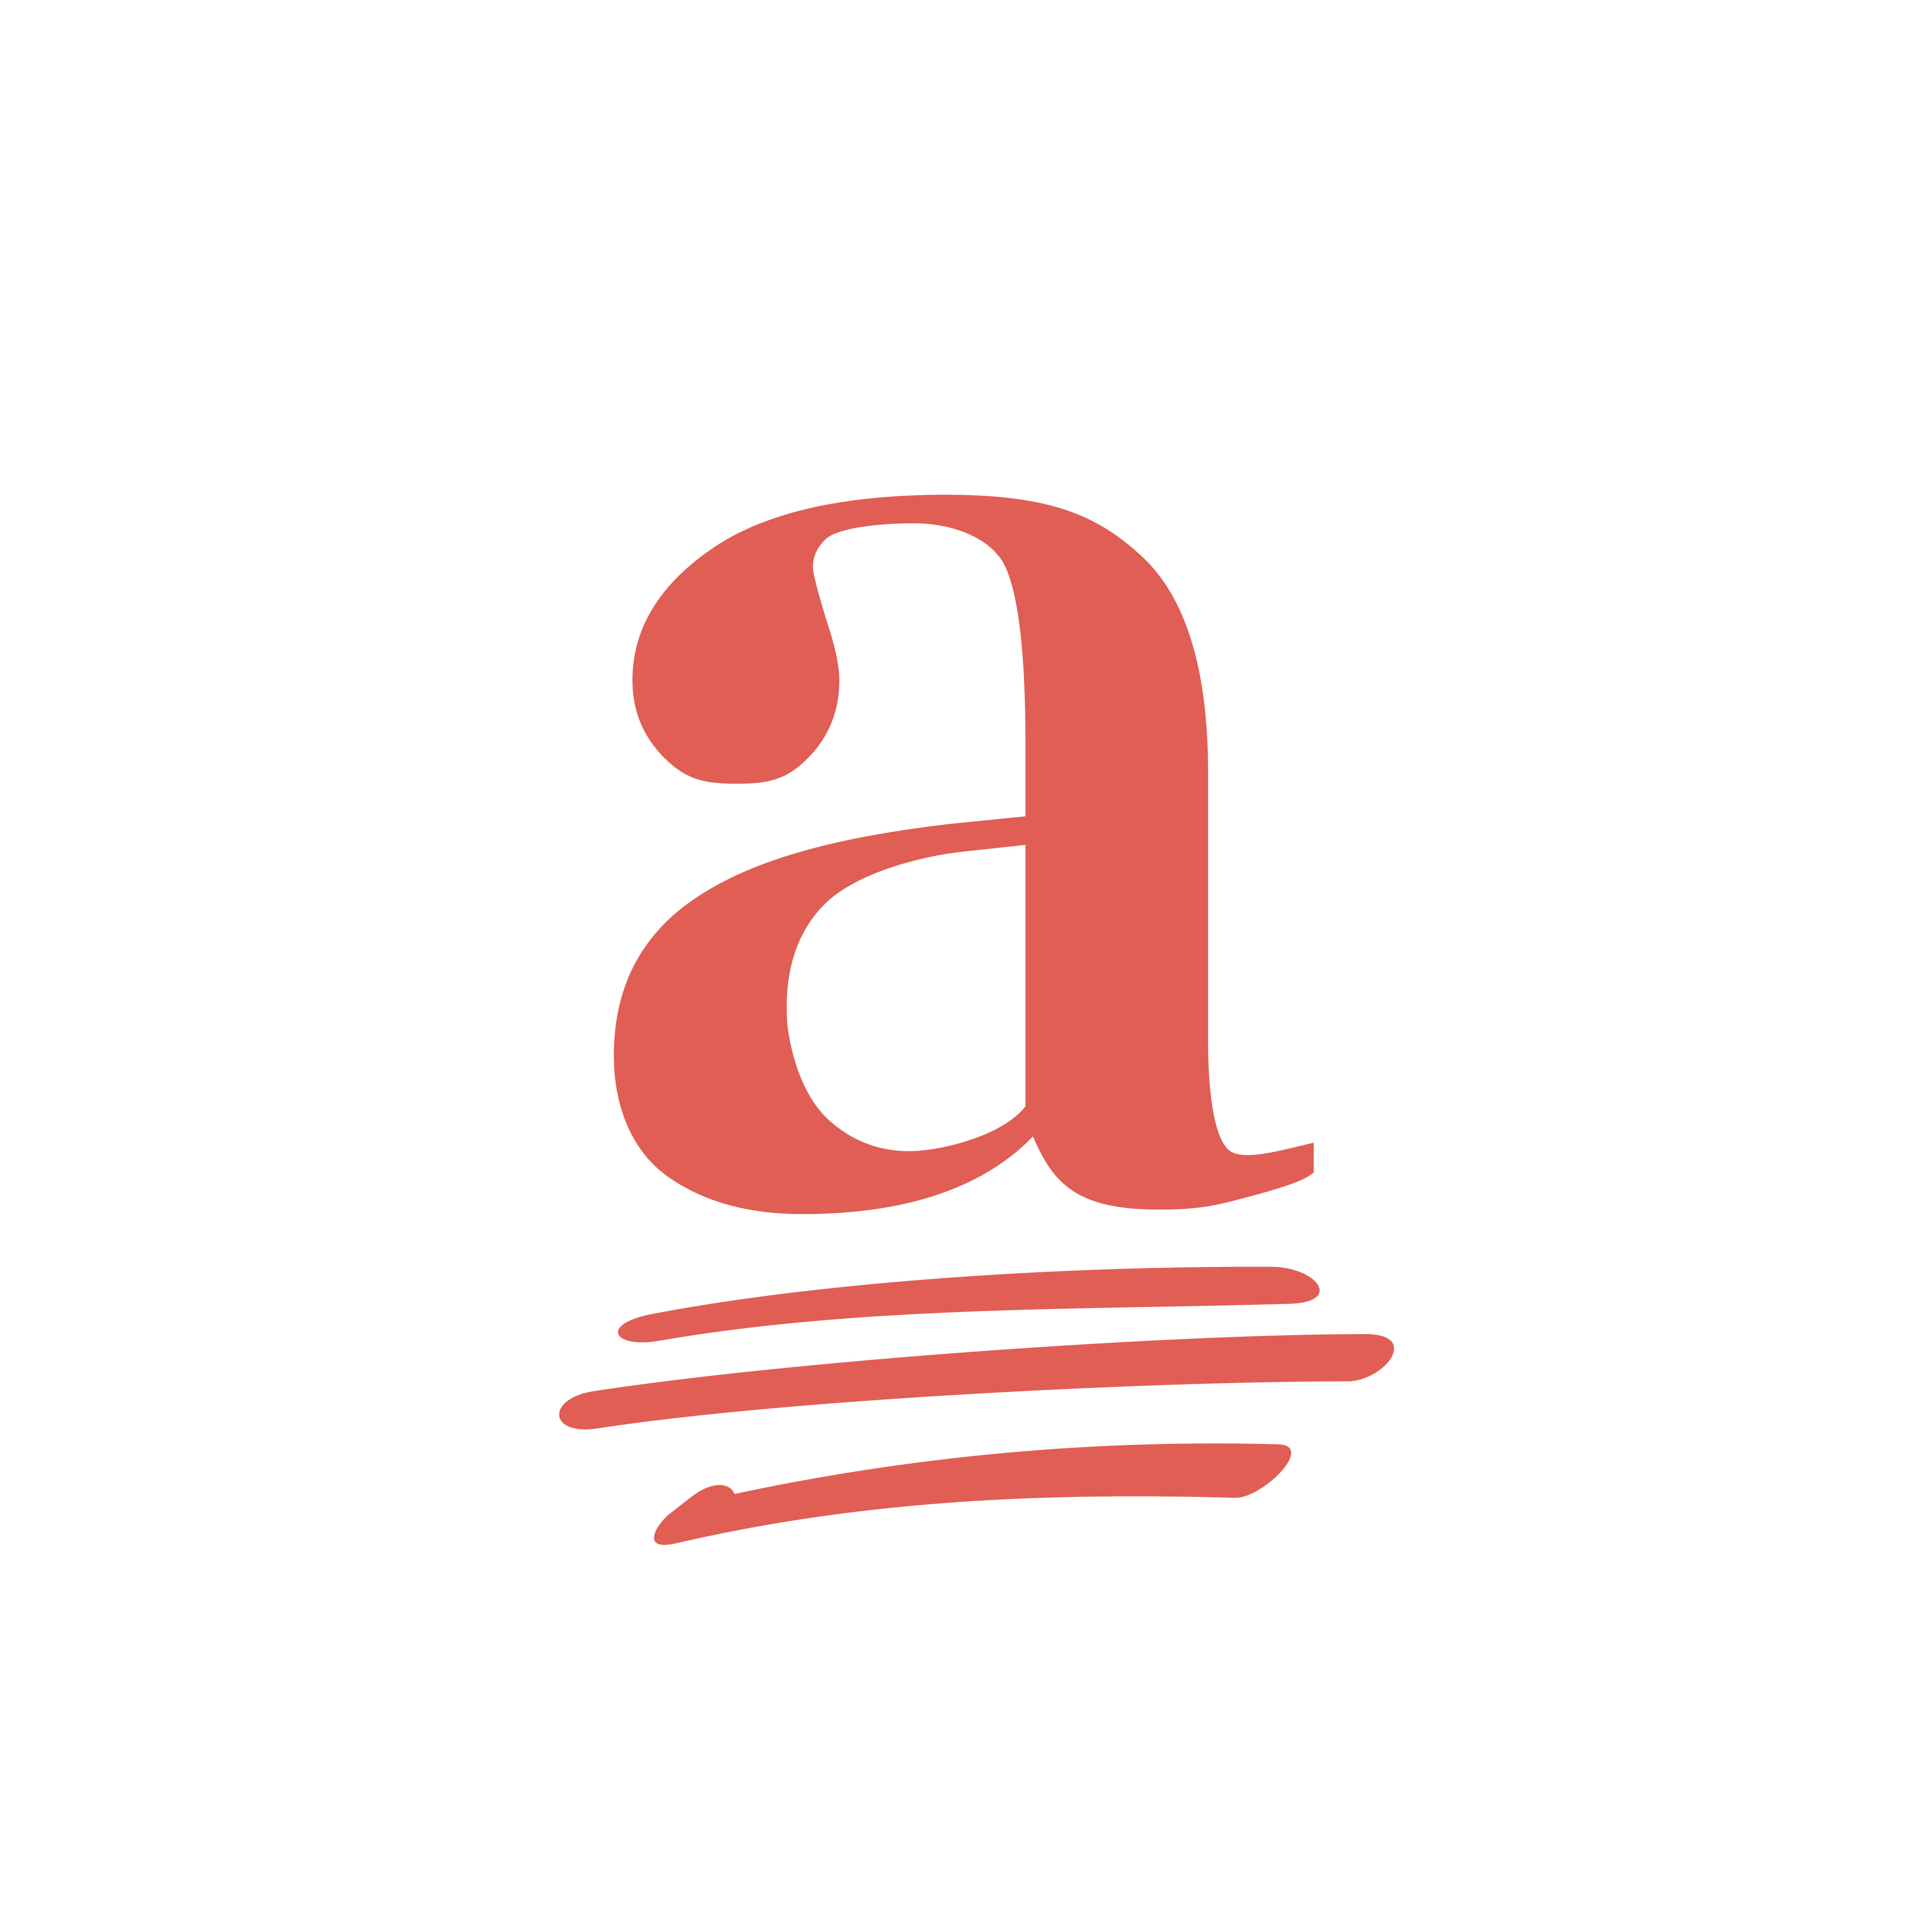 Calligraphy Symbol Red Logo - Press Room | ACES: The Society for Editing